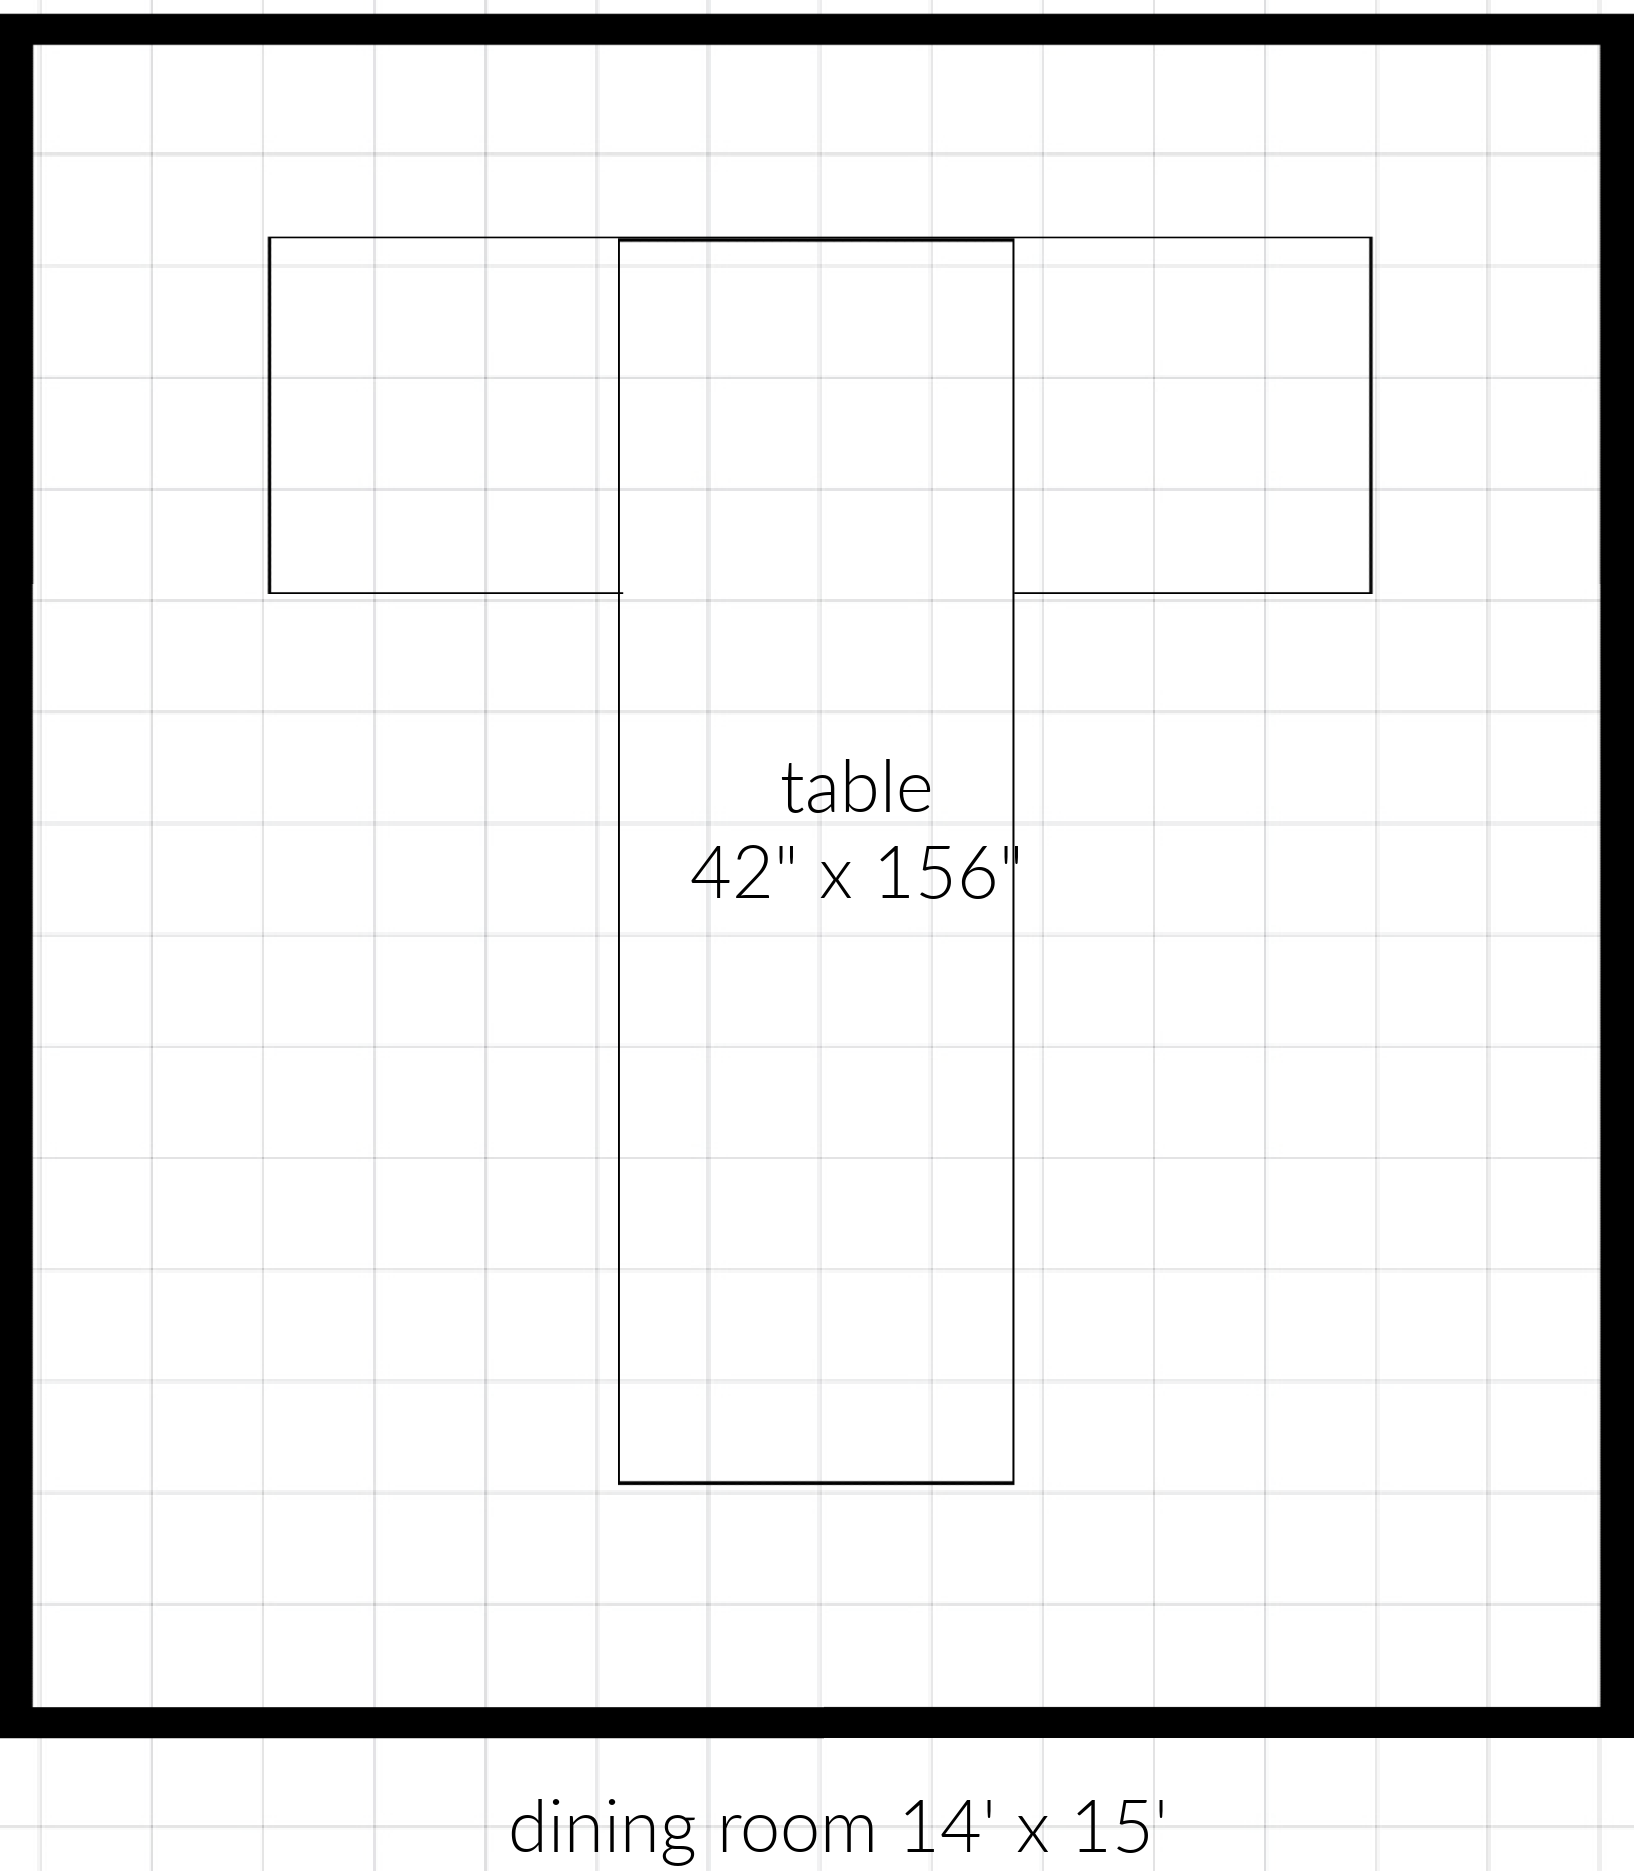 T-shaped dining table